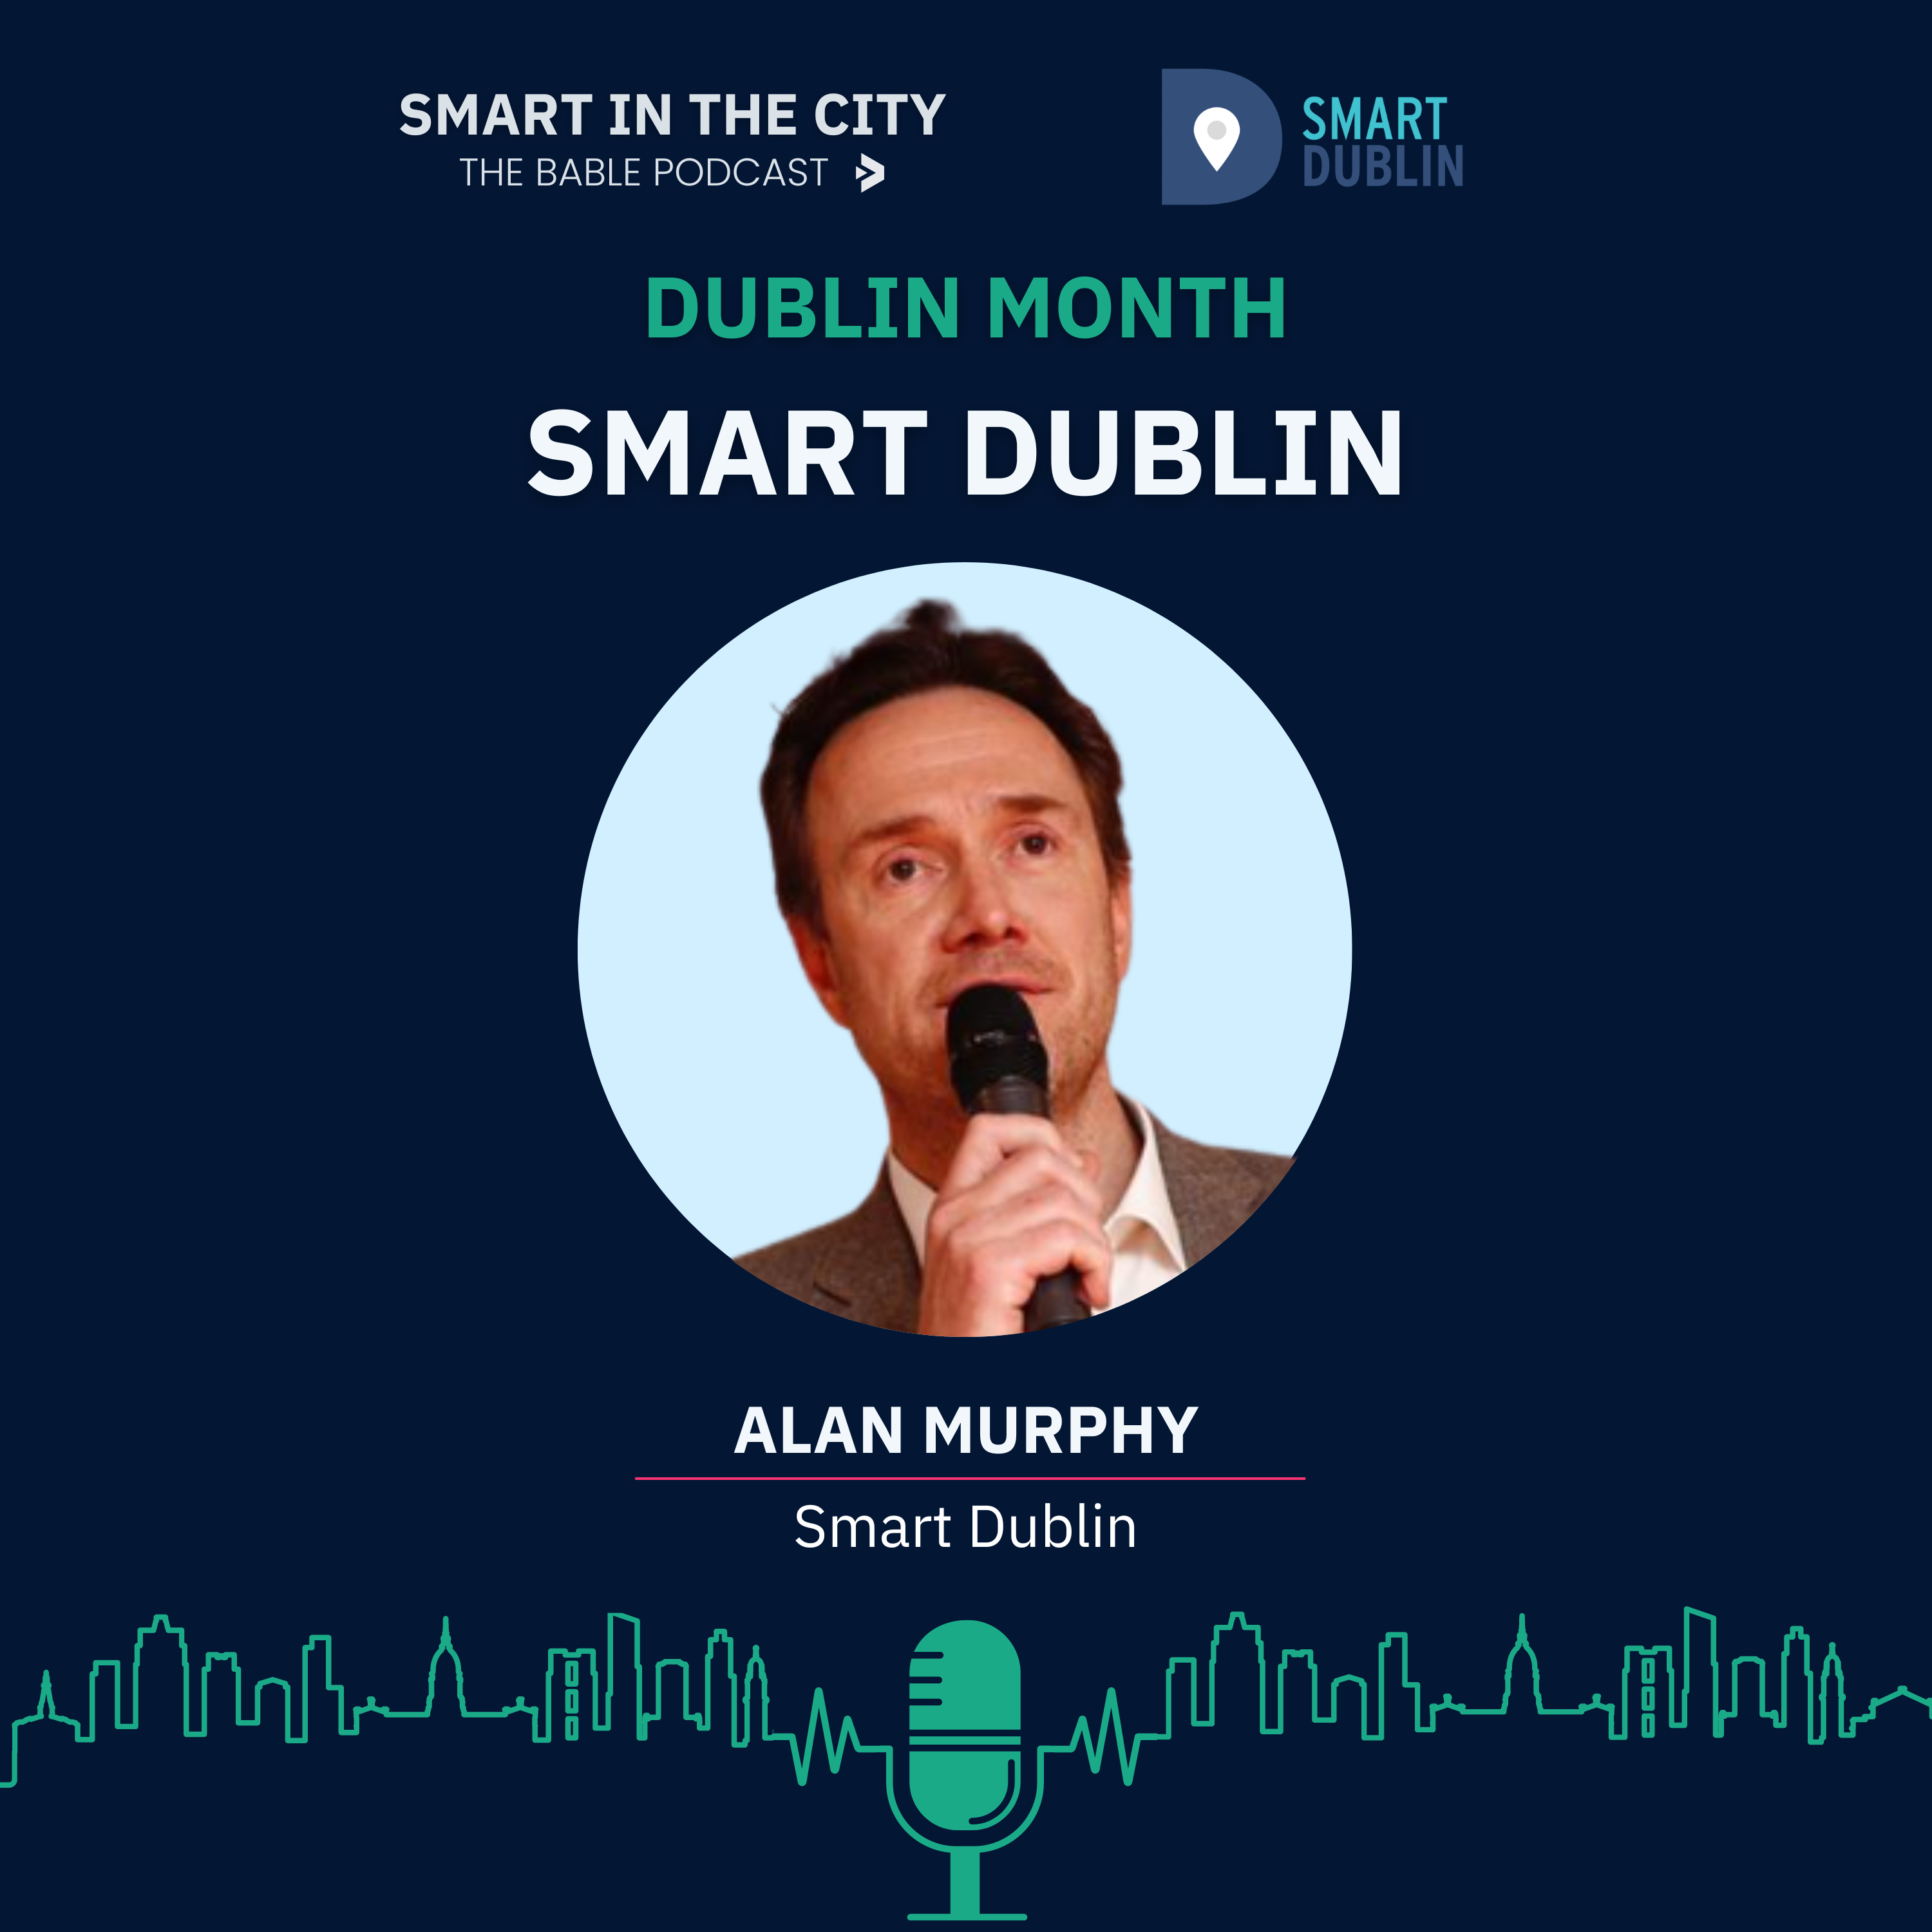 Dublin Month #1 - Smart Dublin: "It's all about people and relationships"